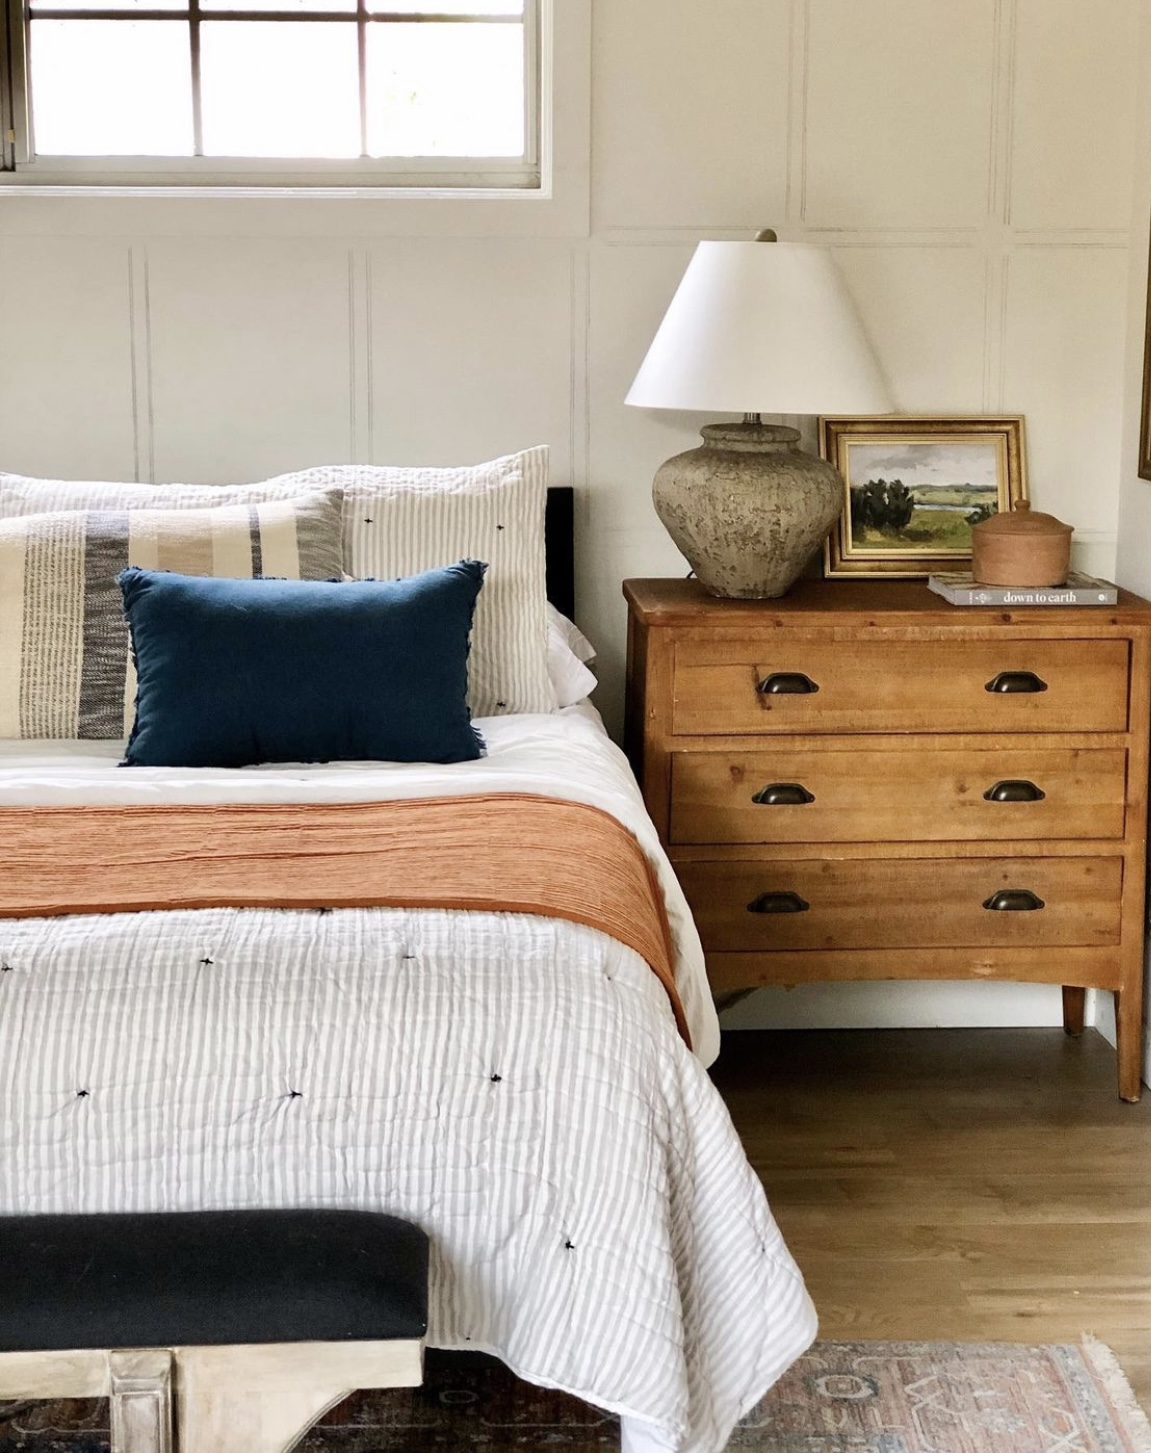 5 Bed Styling Tips (#3 is a game changer) 